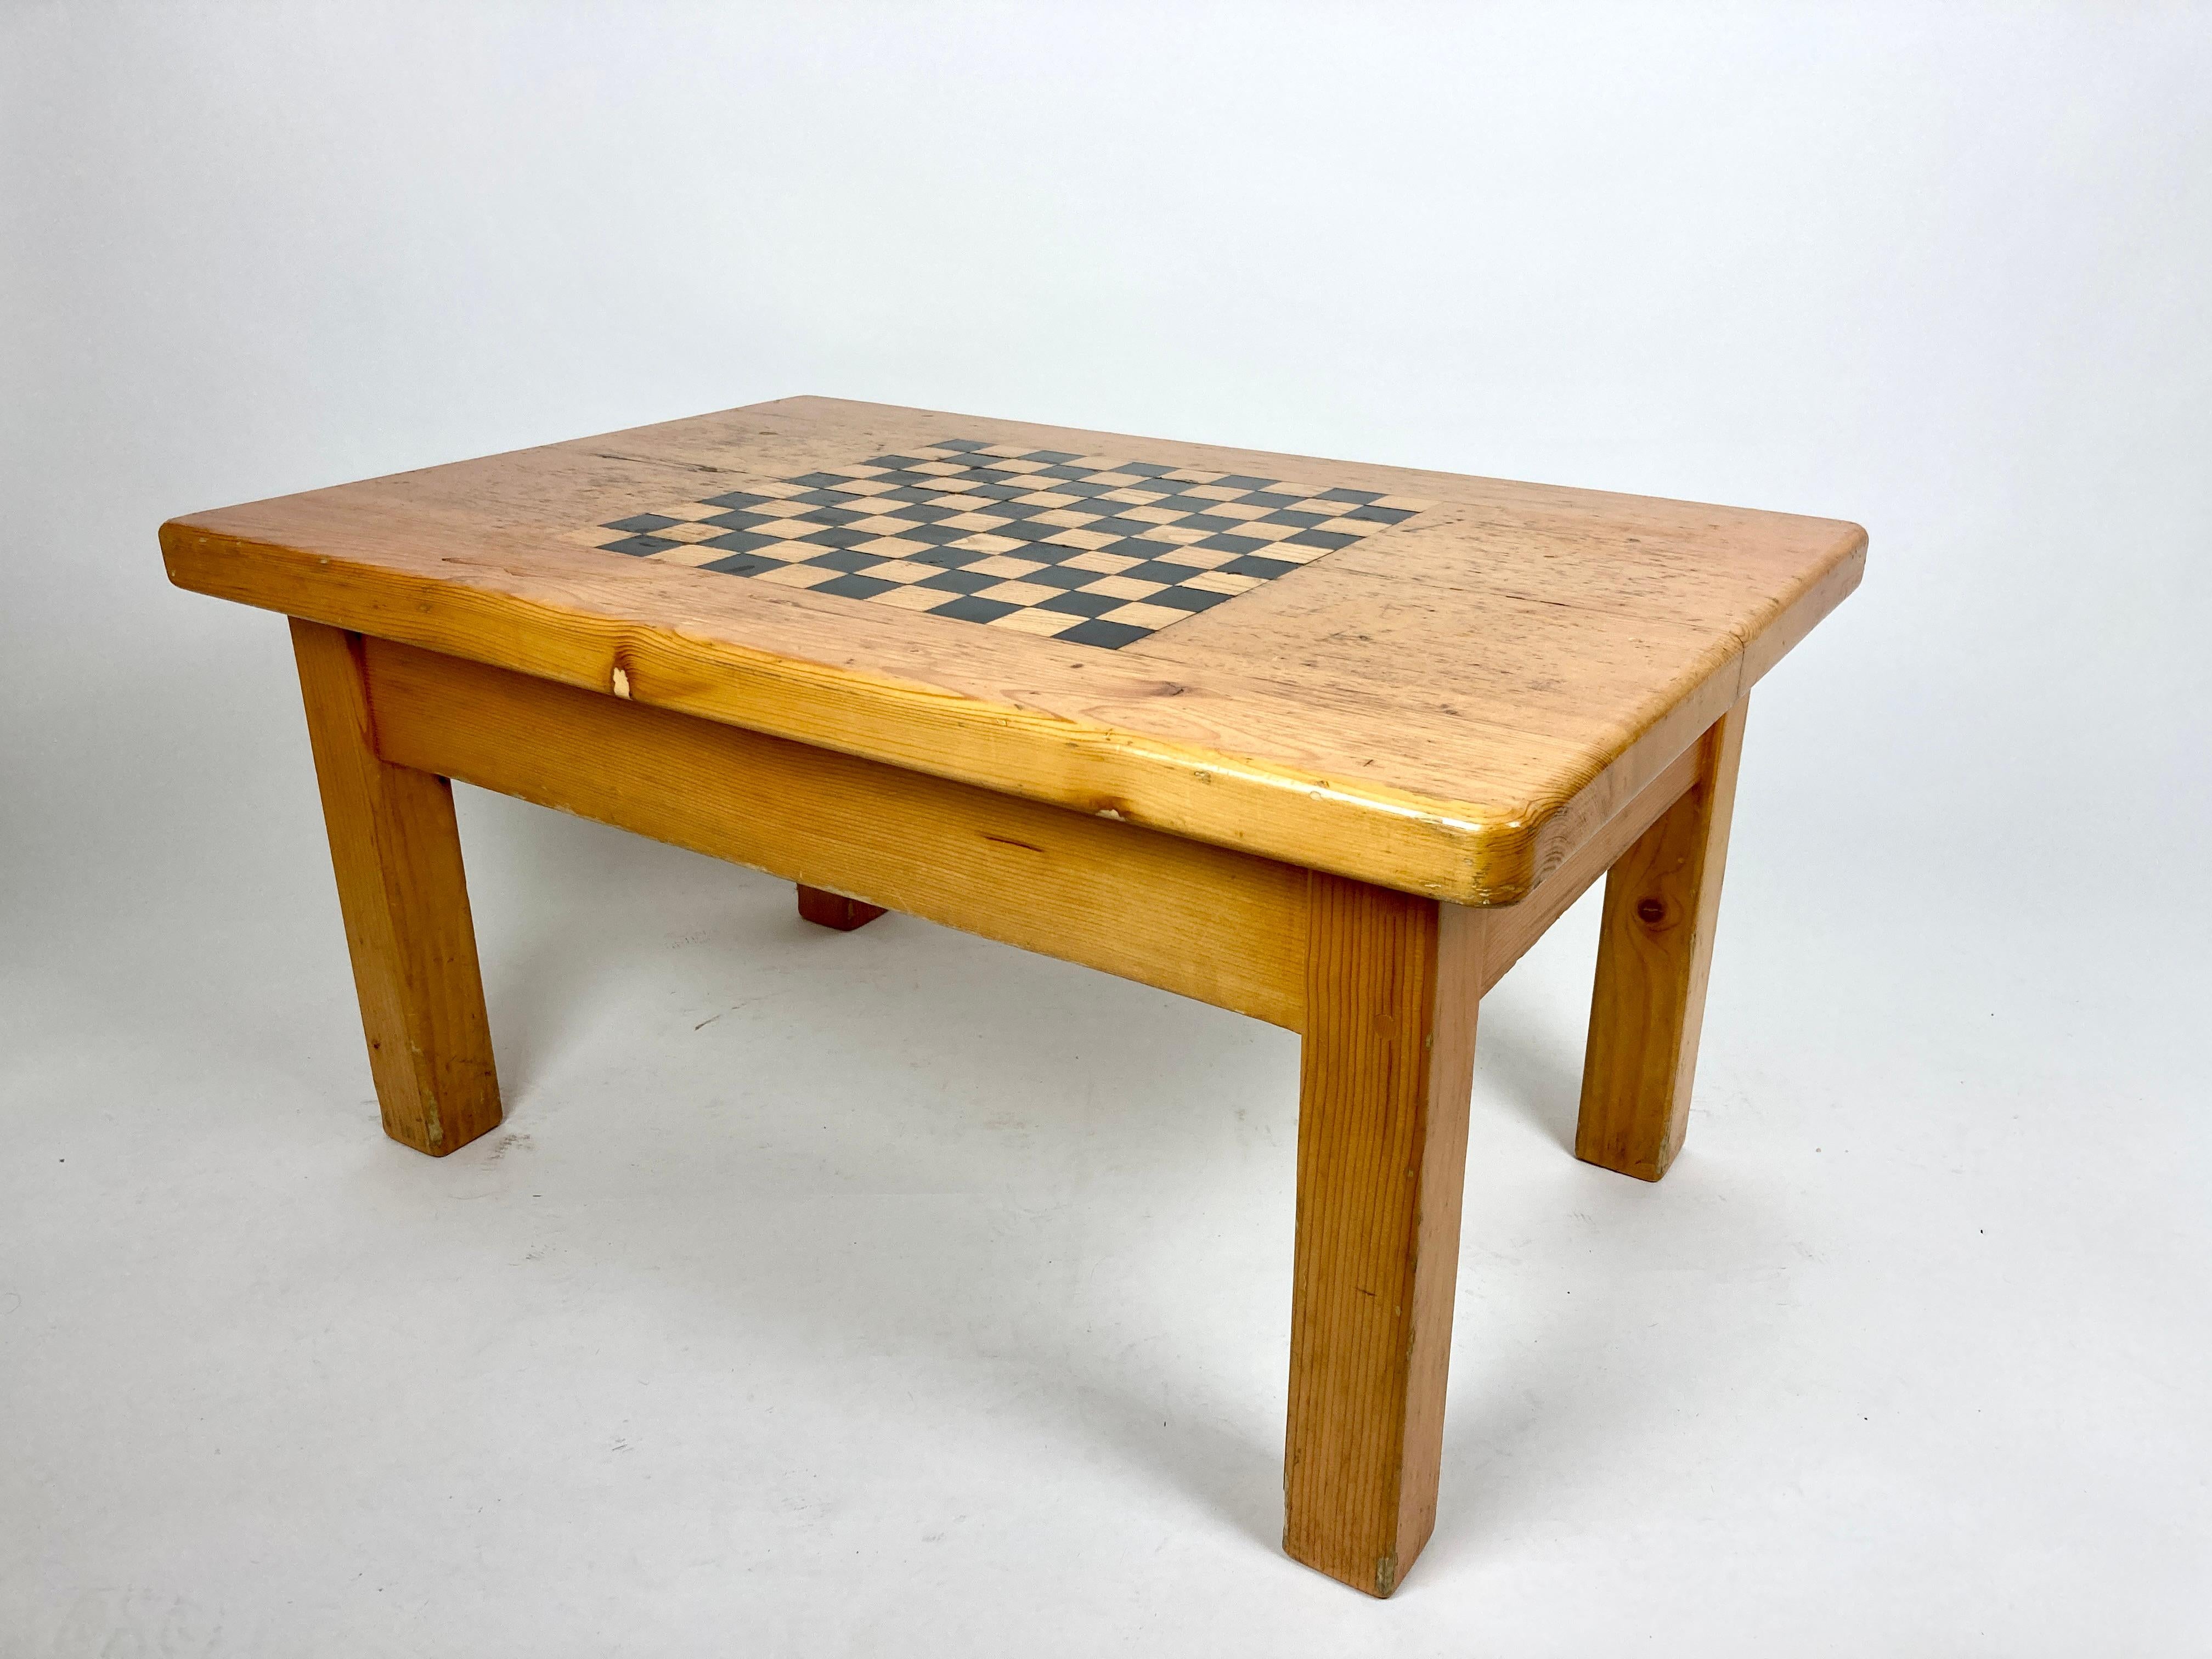 Vintage French Alpine Chalet Coffee Table with Inlaid Chequer Board 3